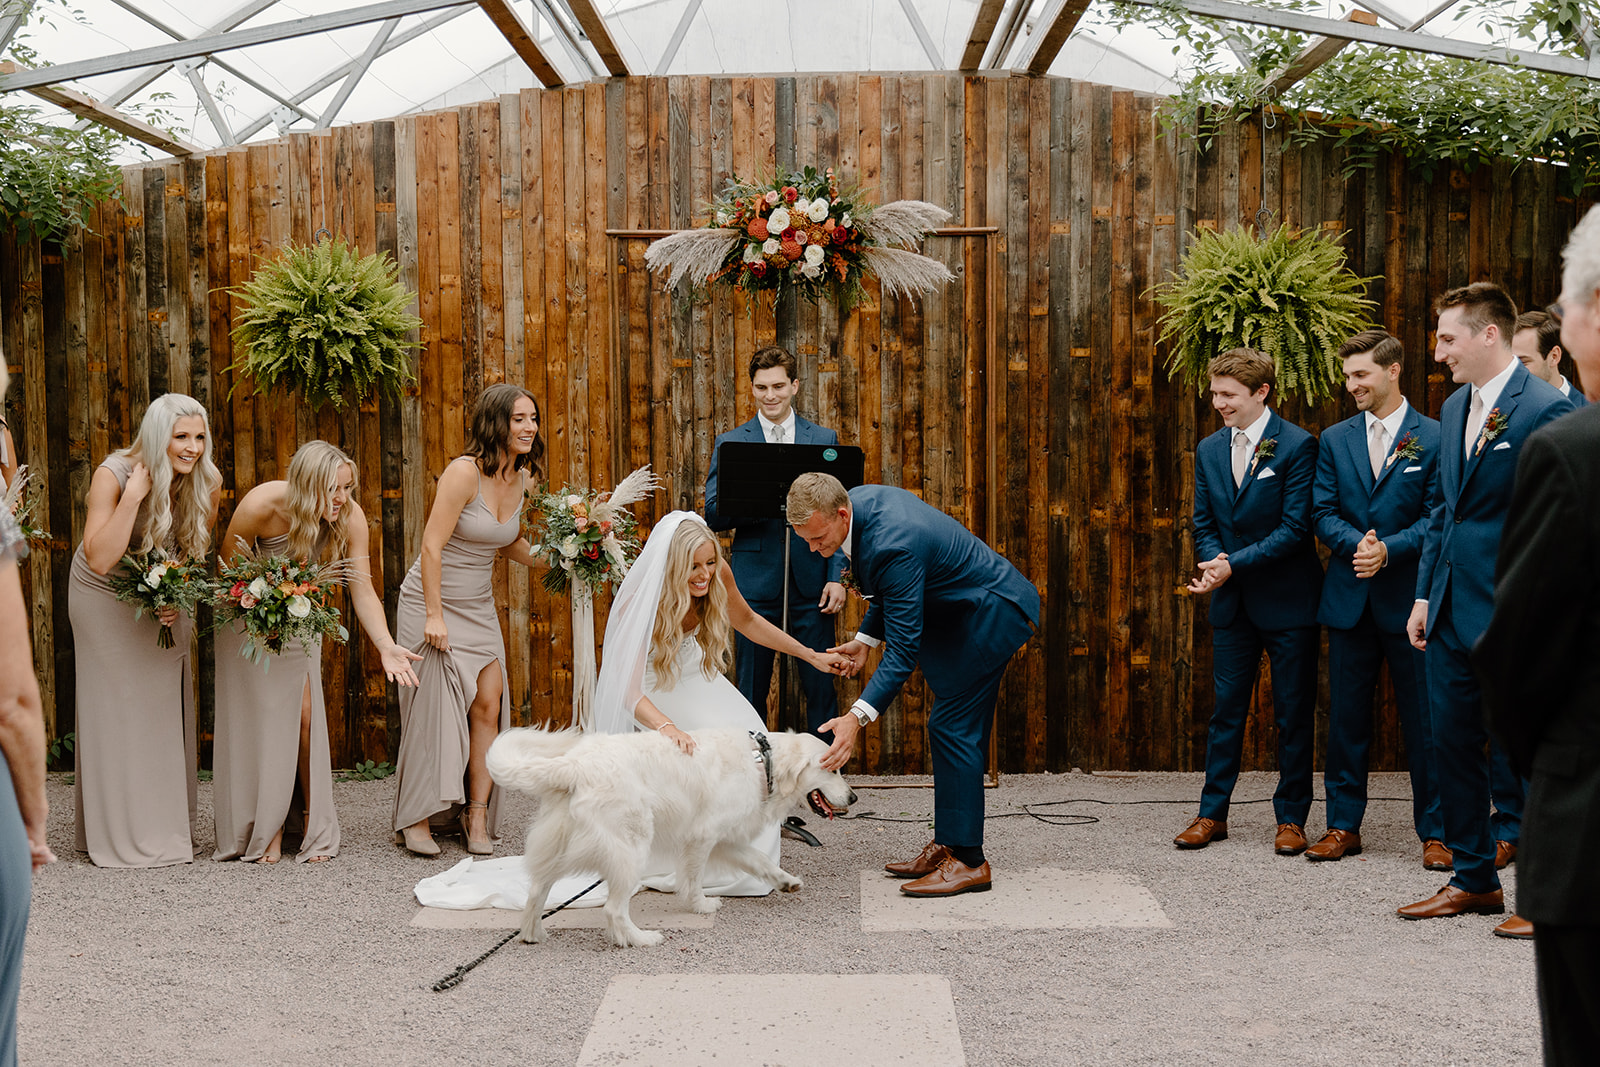 Bride and groom greet dog at the end of the aisle